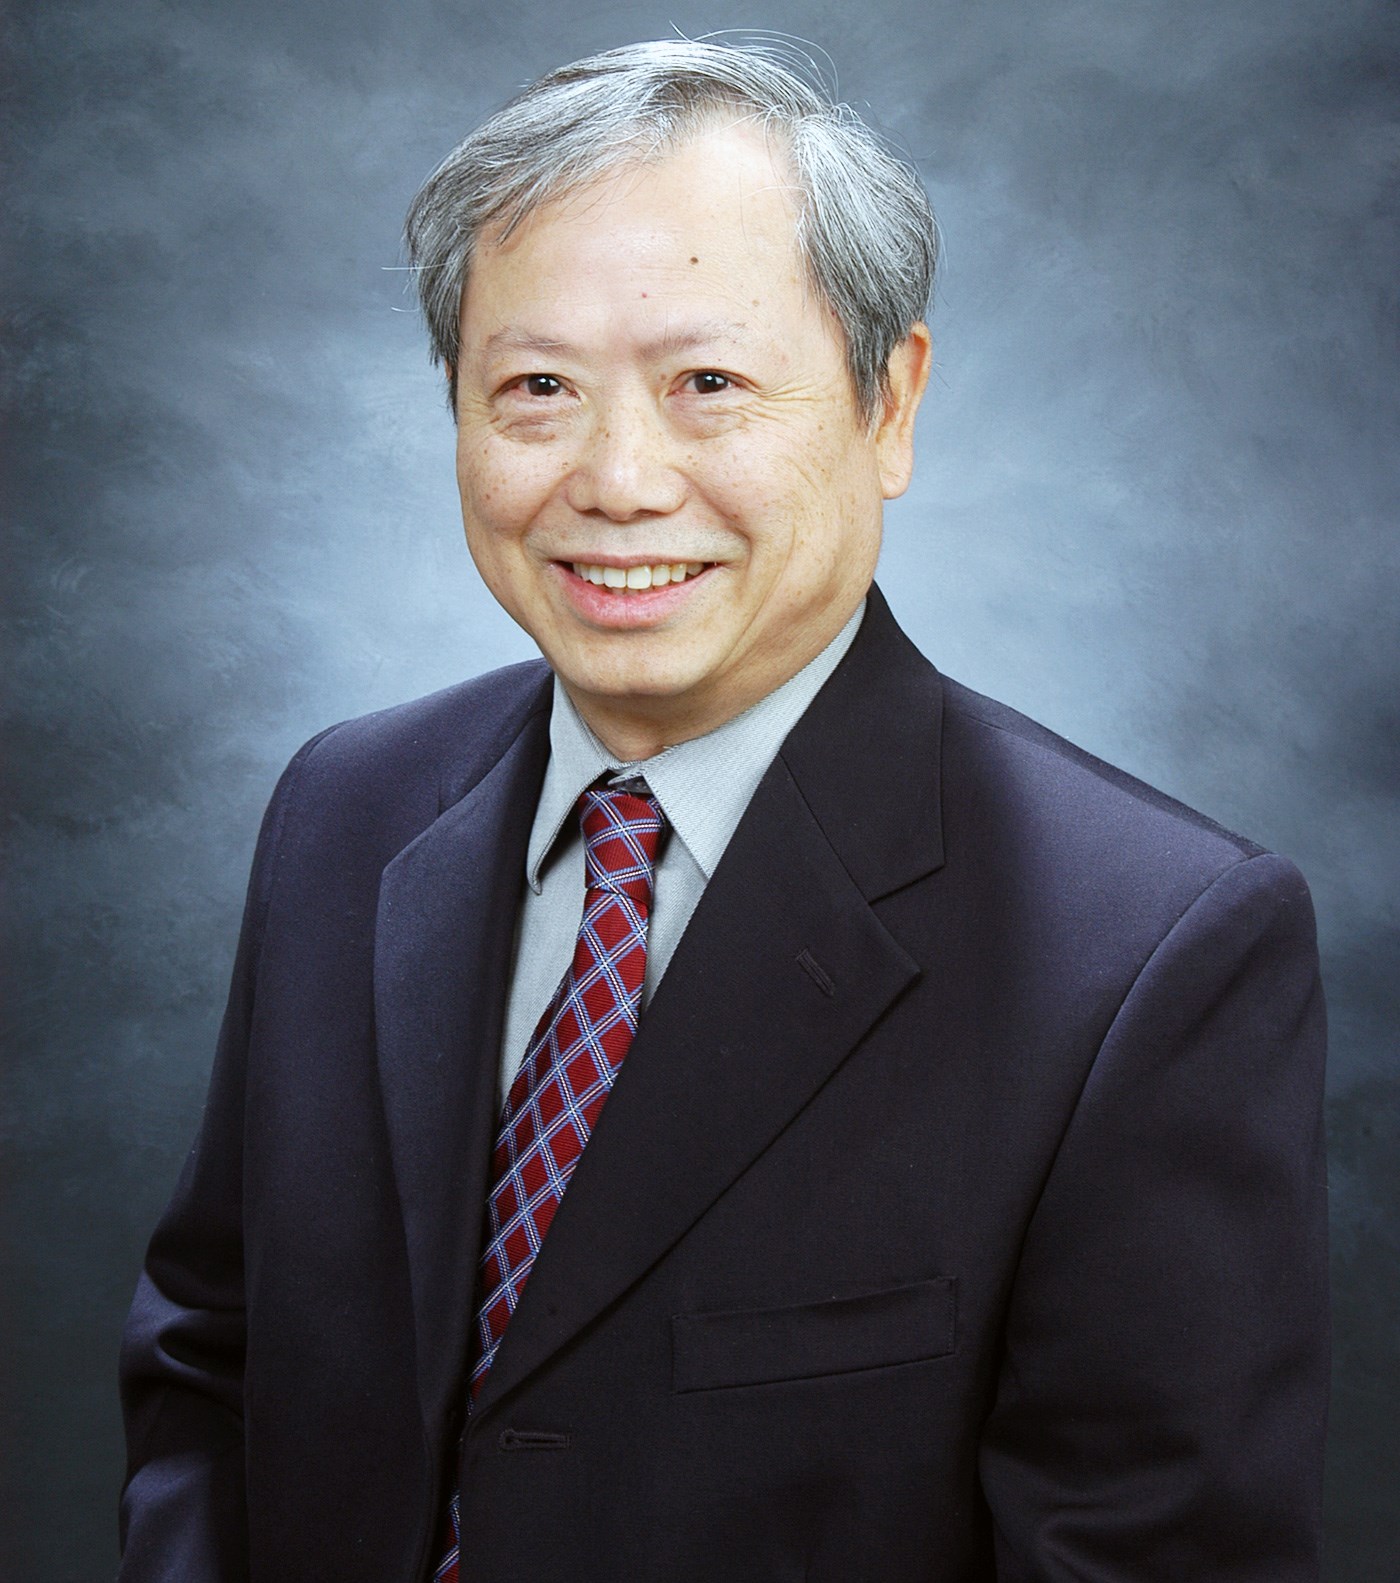 Anh Tran is a Professor Emeritus in the Francis College of Engineering's Electrical & Computer Engineering Department at UMass Lowell.